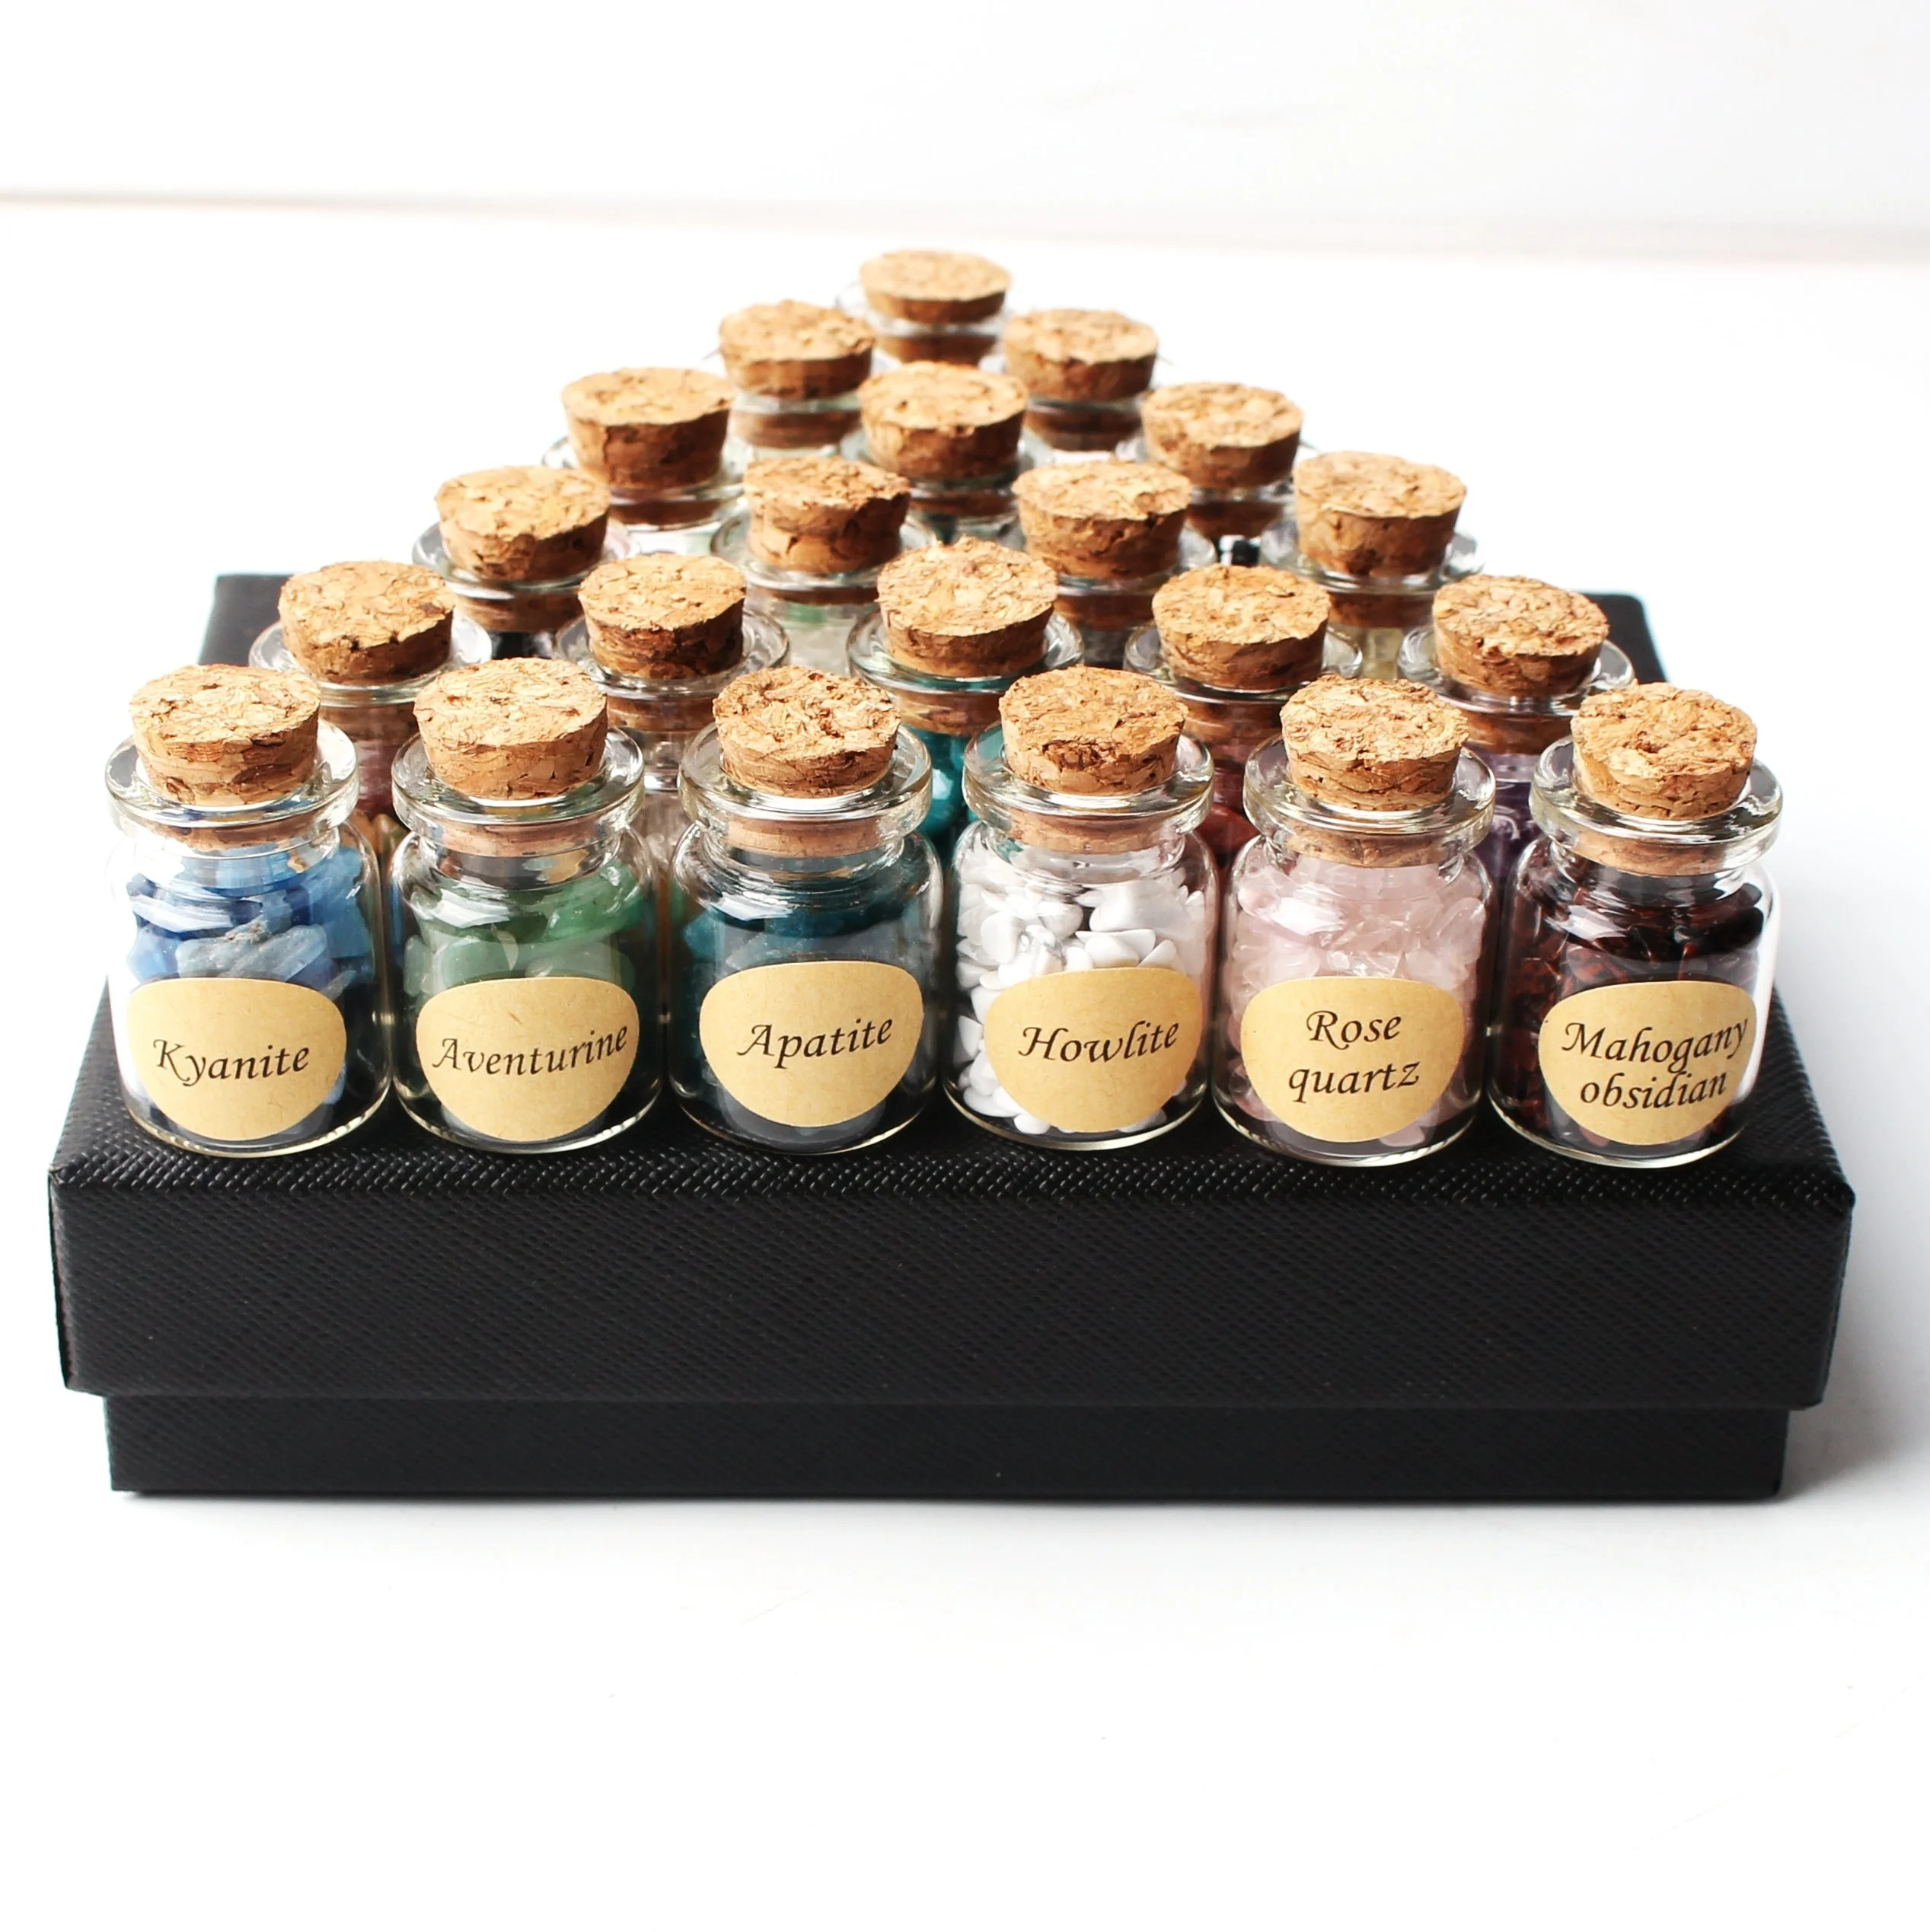 

18Pcs A set of Natural Crystal Rockstone Gravel Wishing Bottles Minerals Specimen Mini stone Reiki Healing Gift With a Box